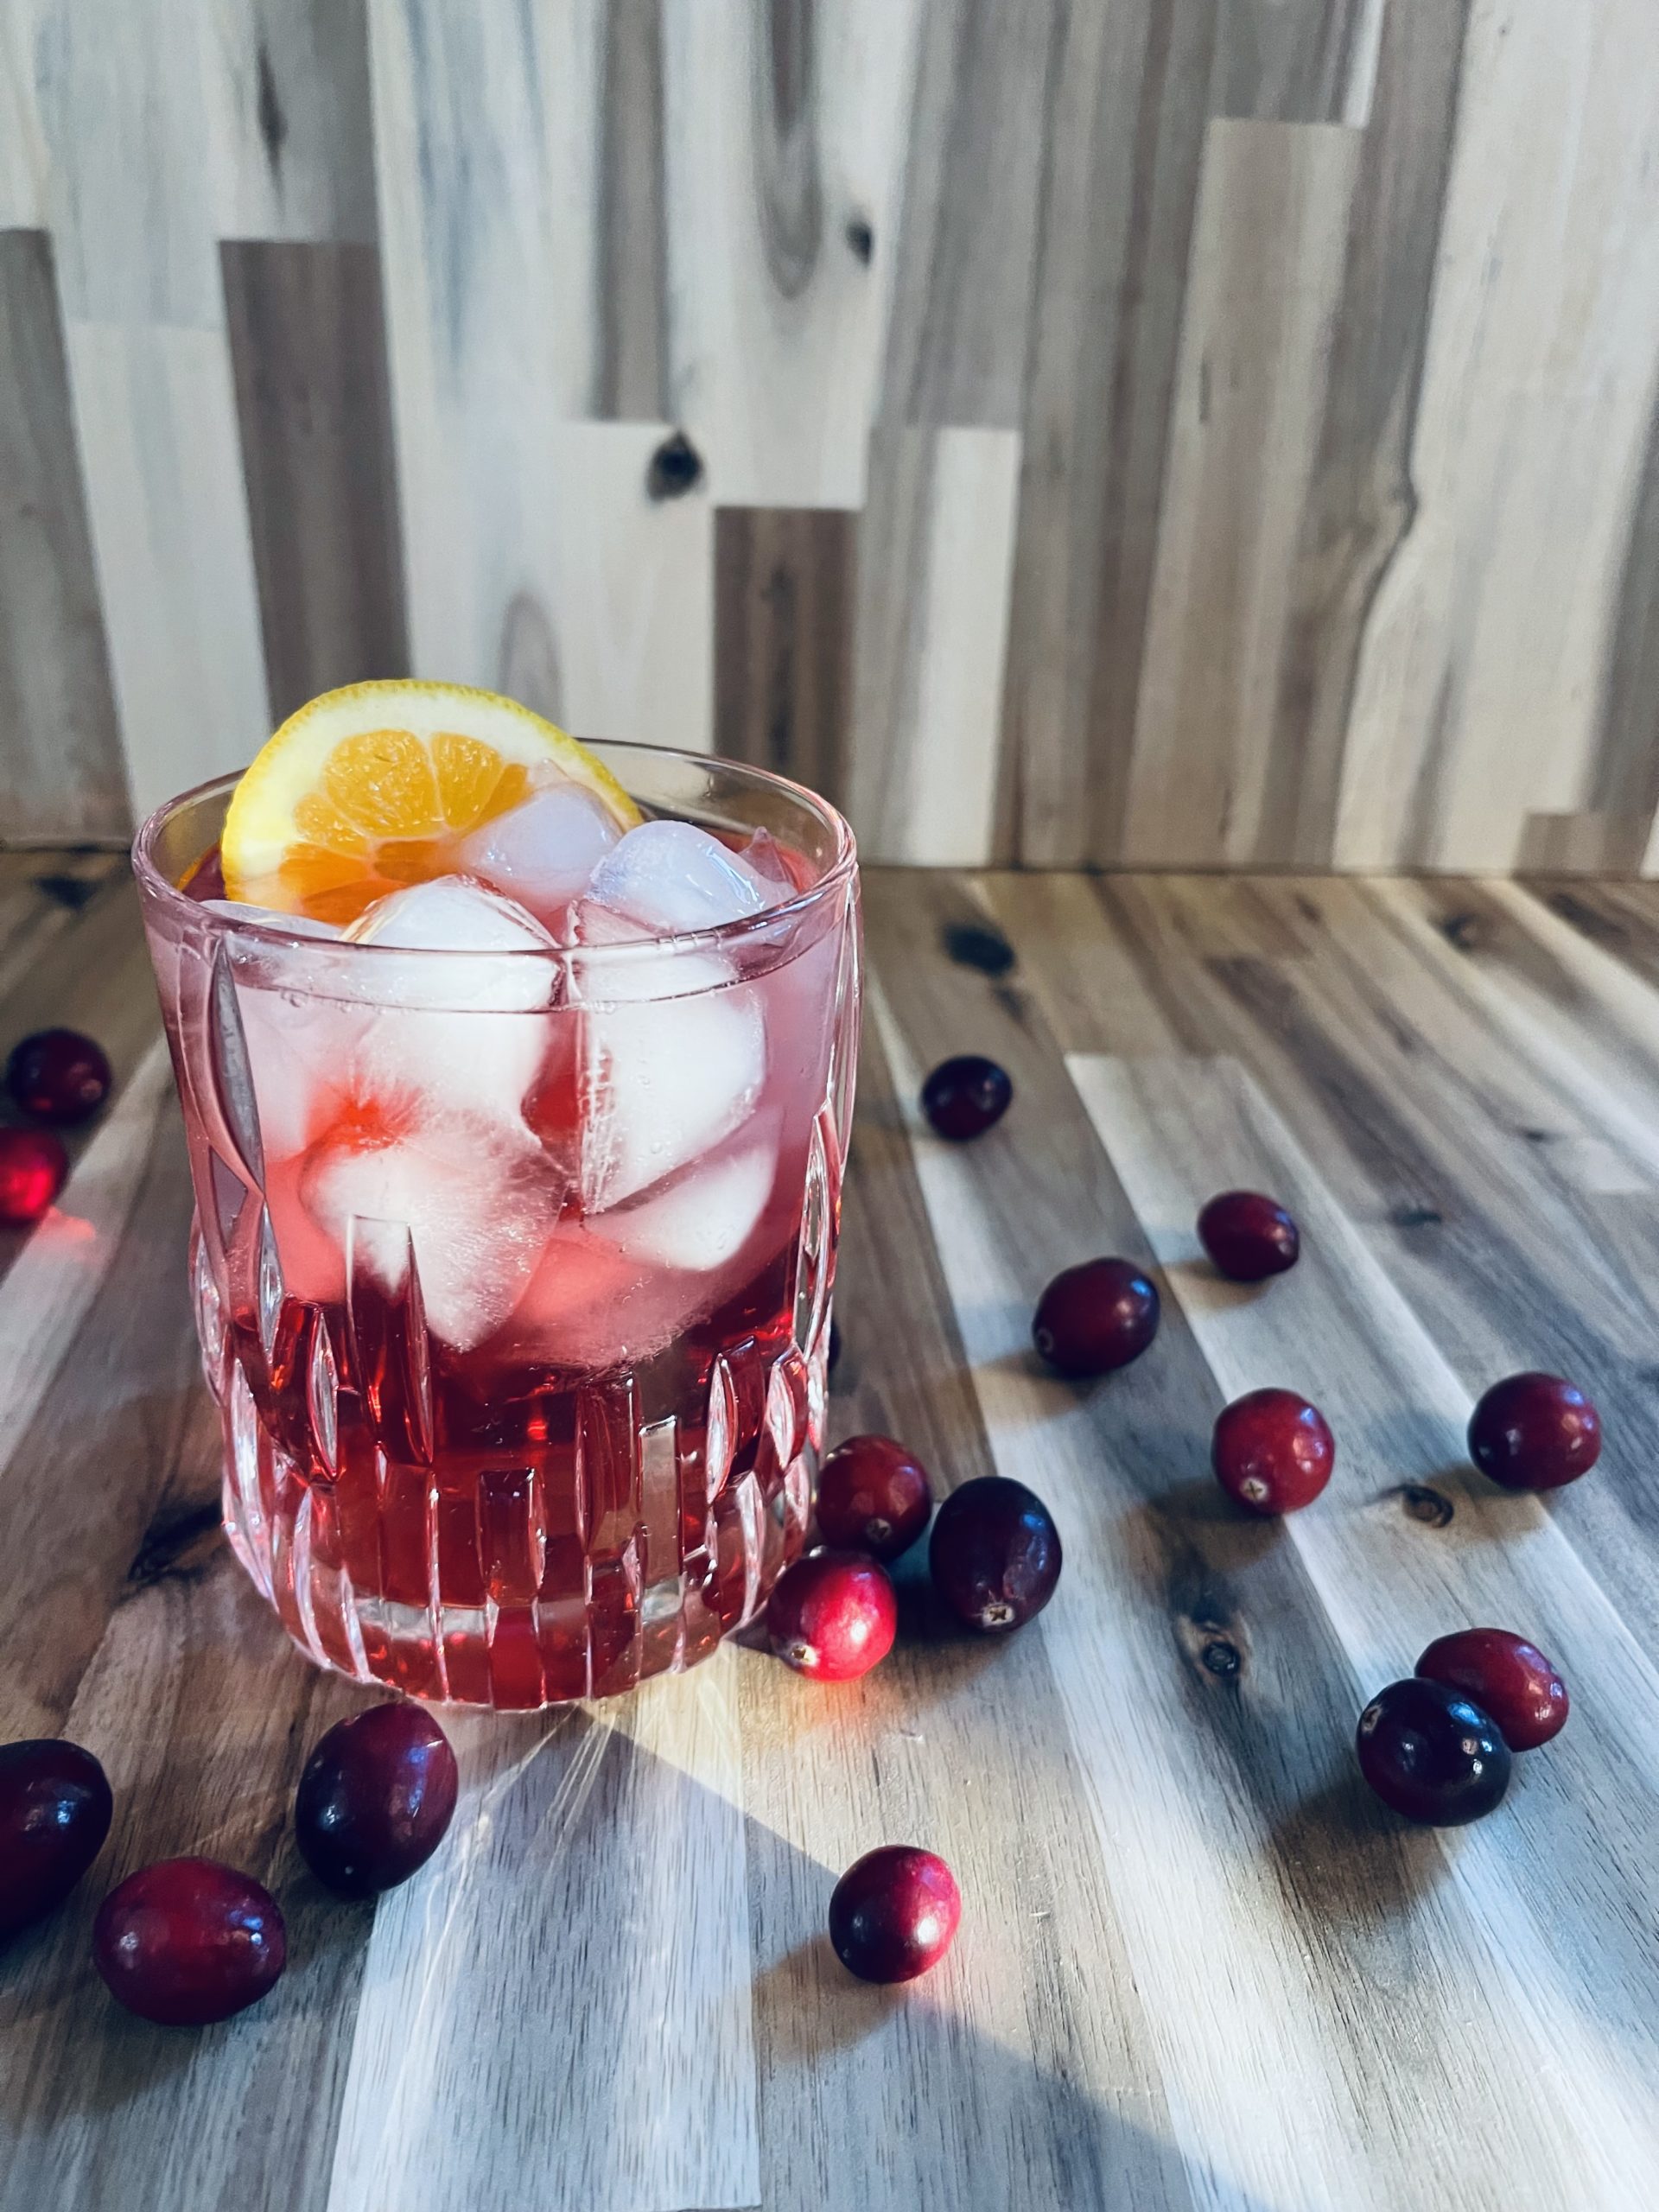 Berry Pitcher - Whisky Cranberry Cocktail - Ballantine's